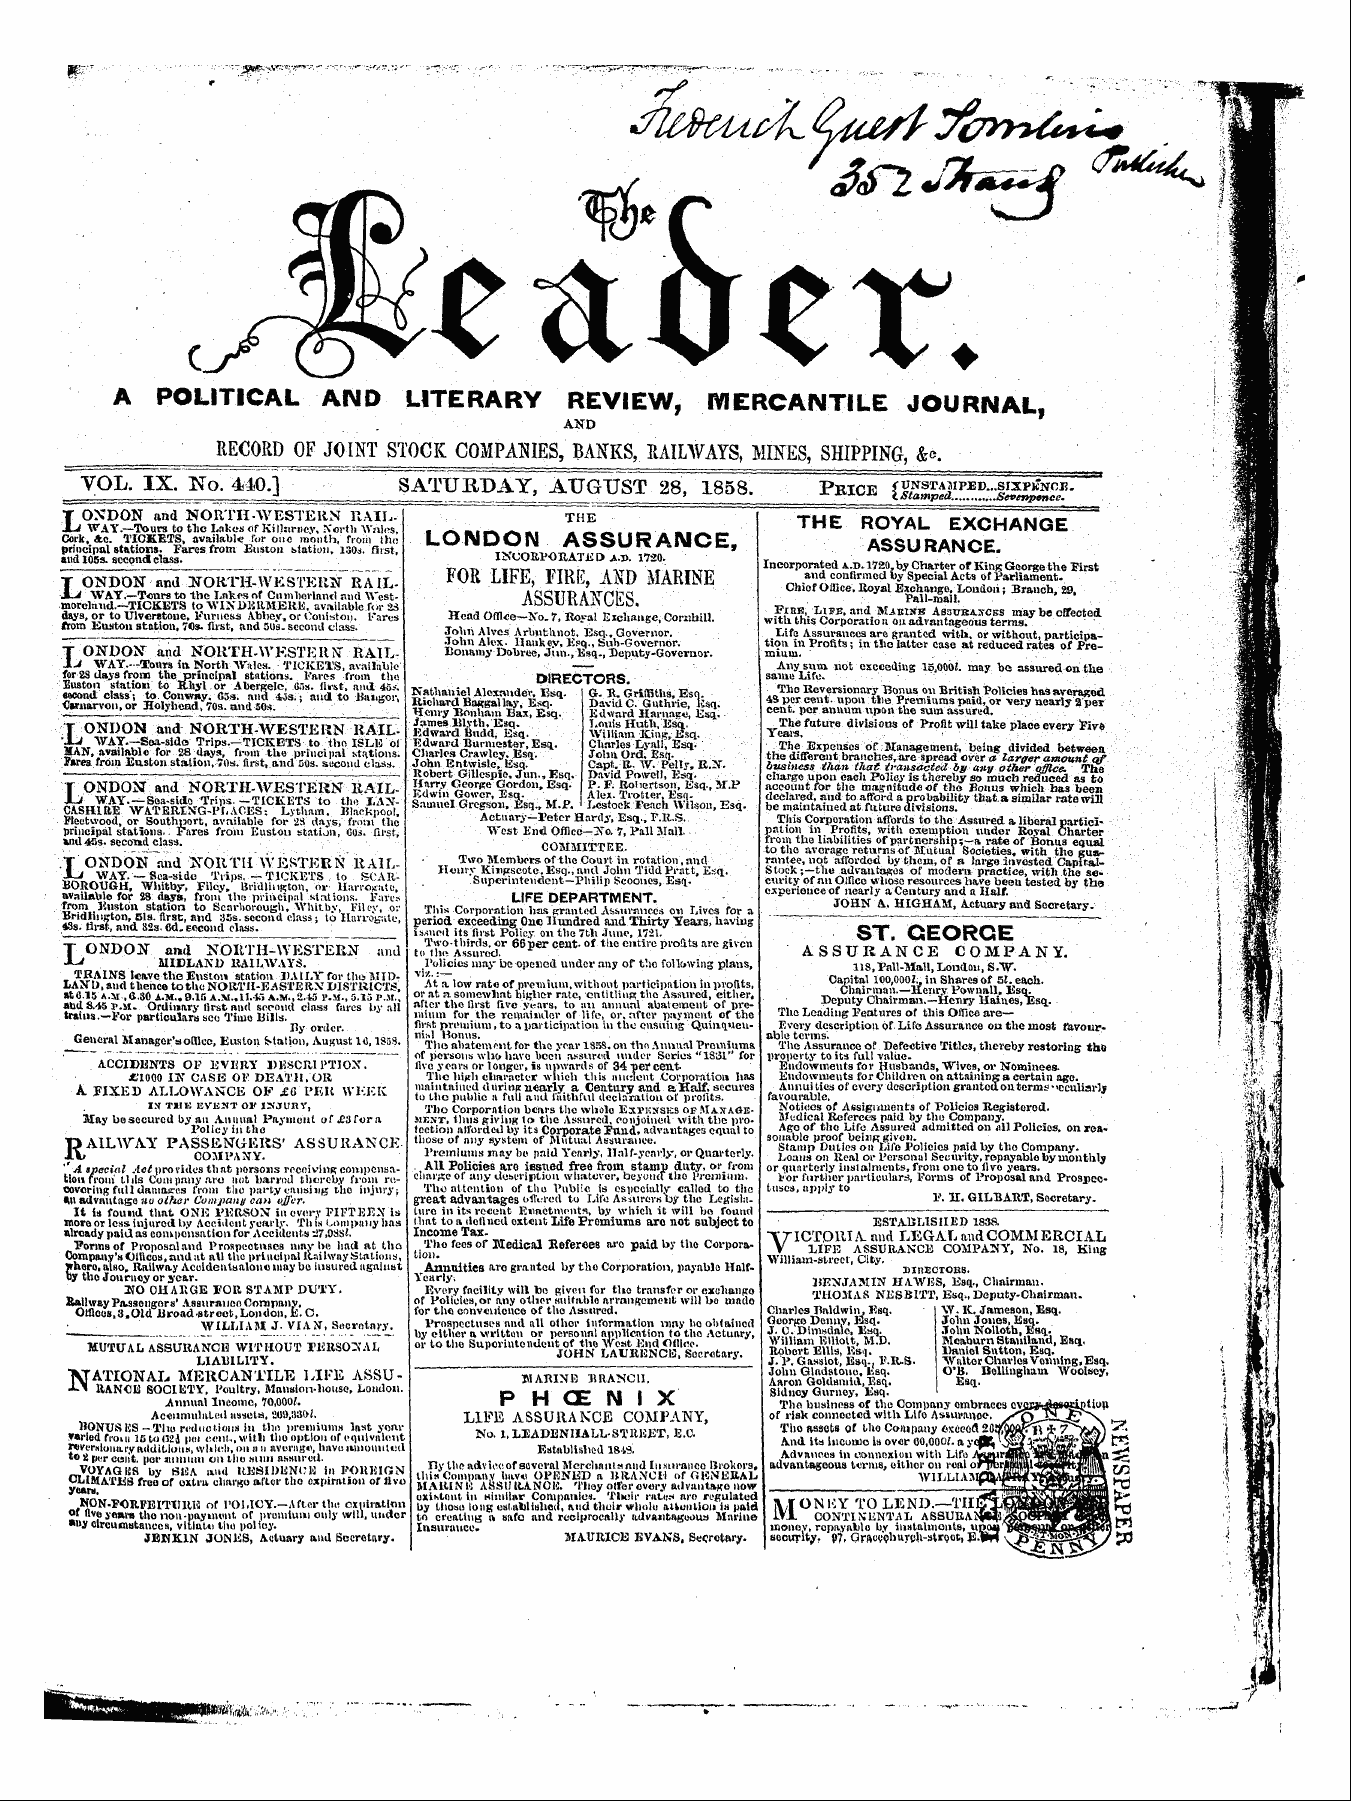 Leader (1850-1860): jS F Y, 1st edition - Ad00108